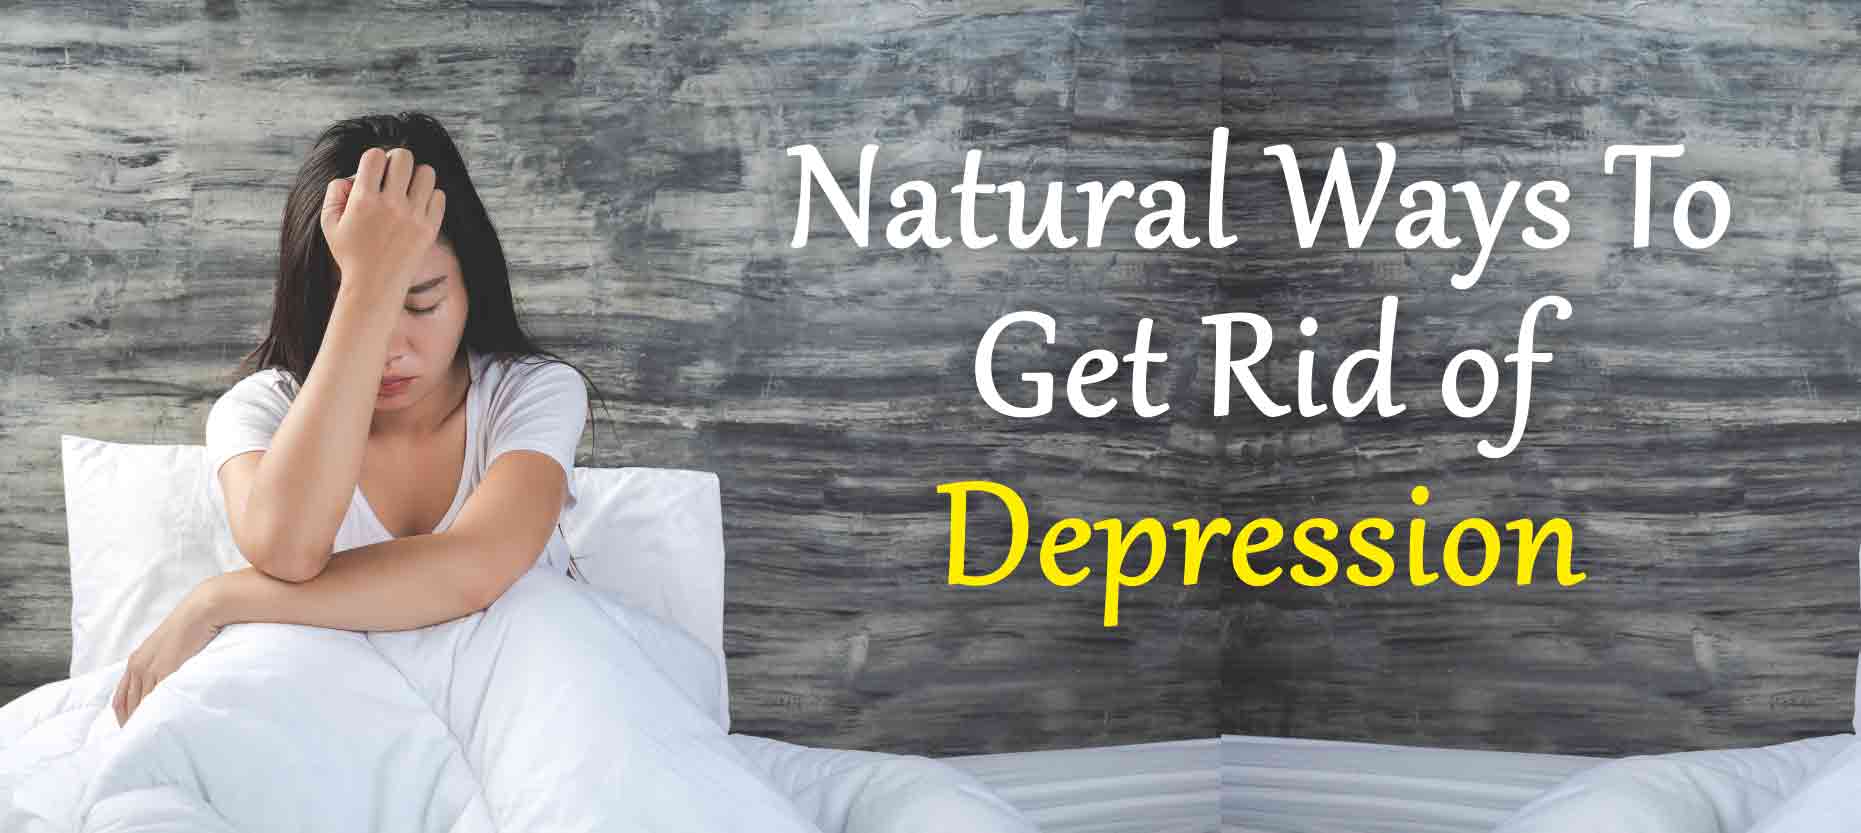 Natural Ways To Get Rid of Depression